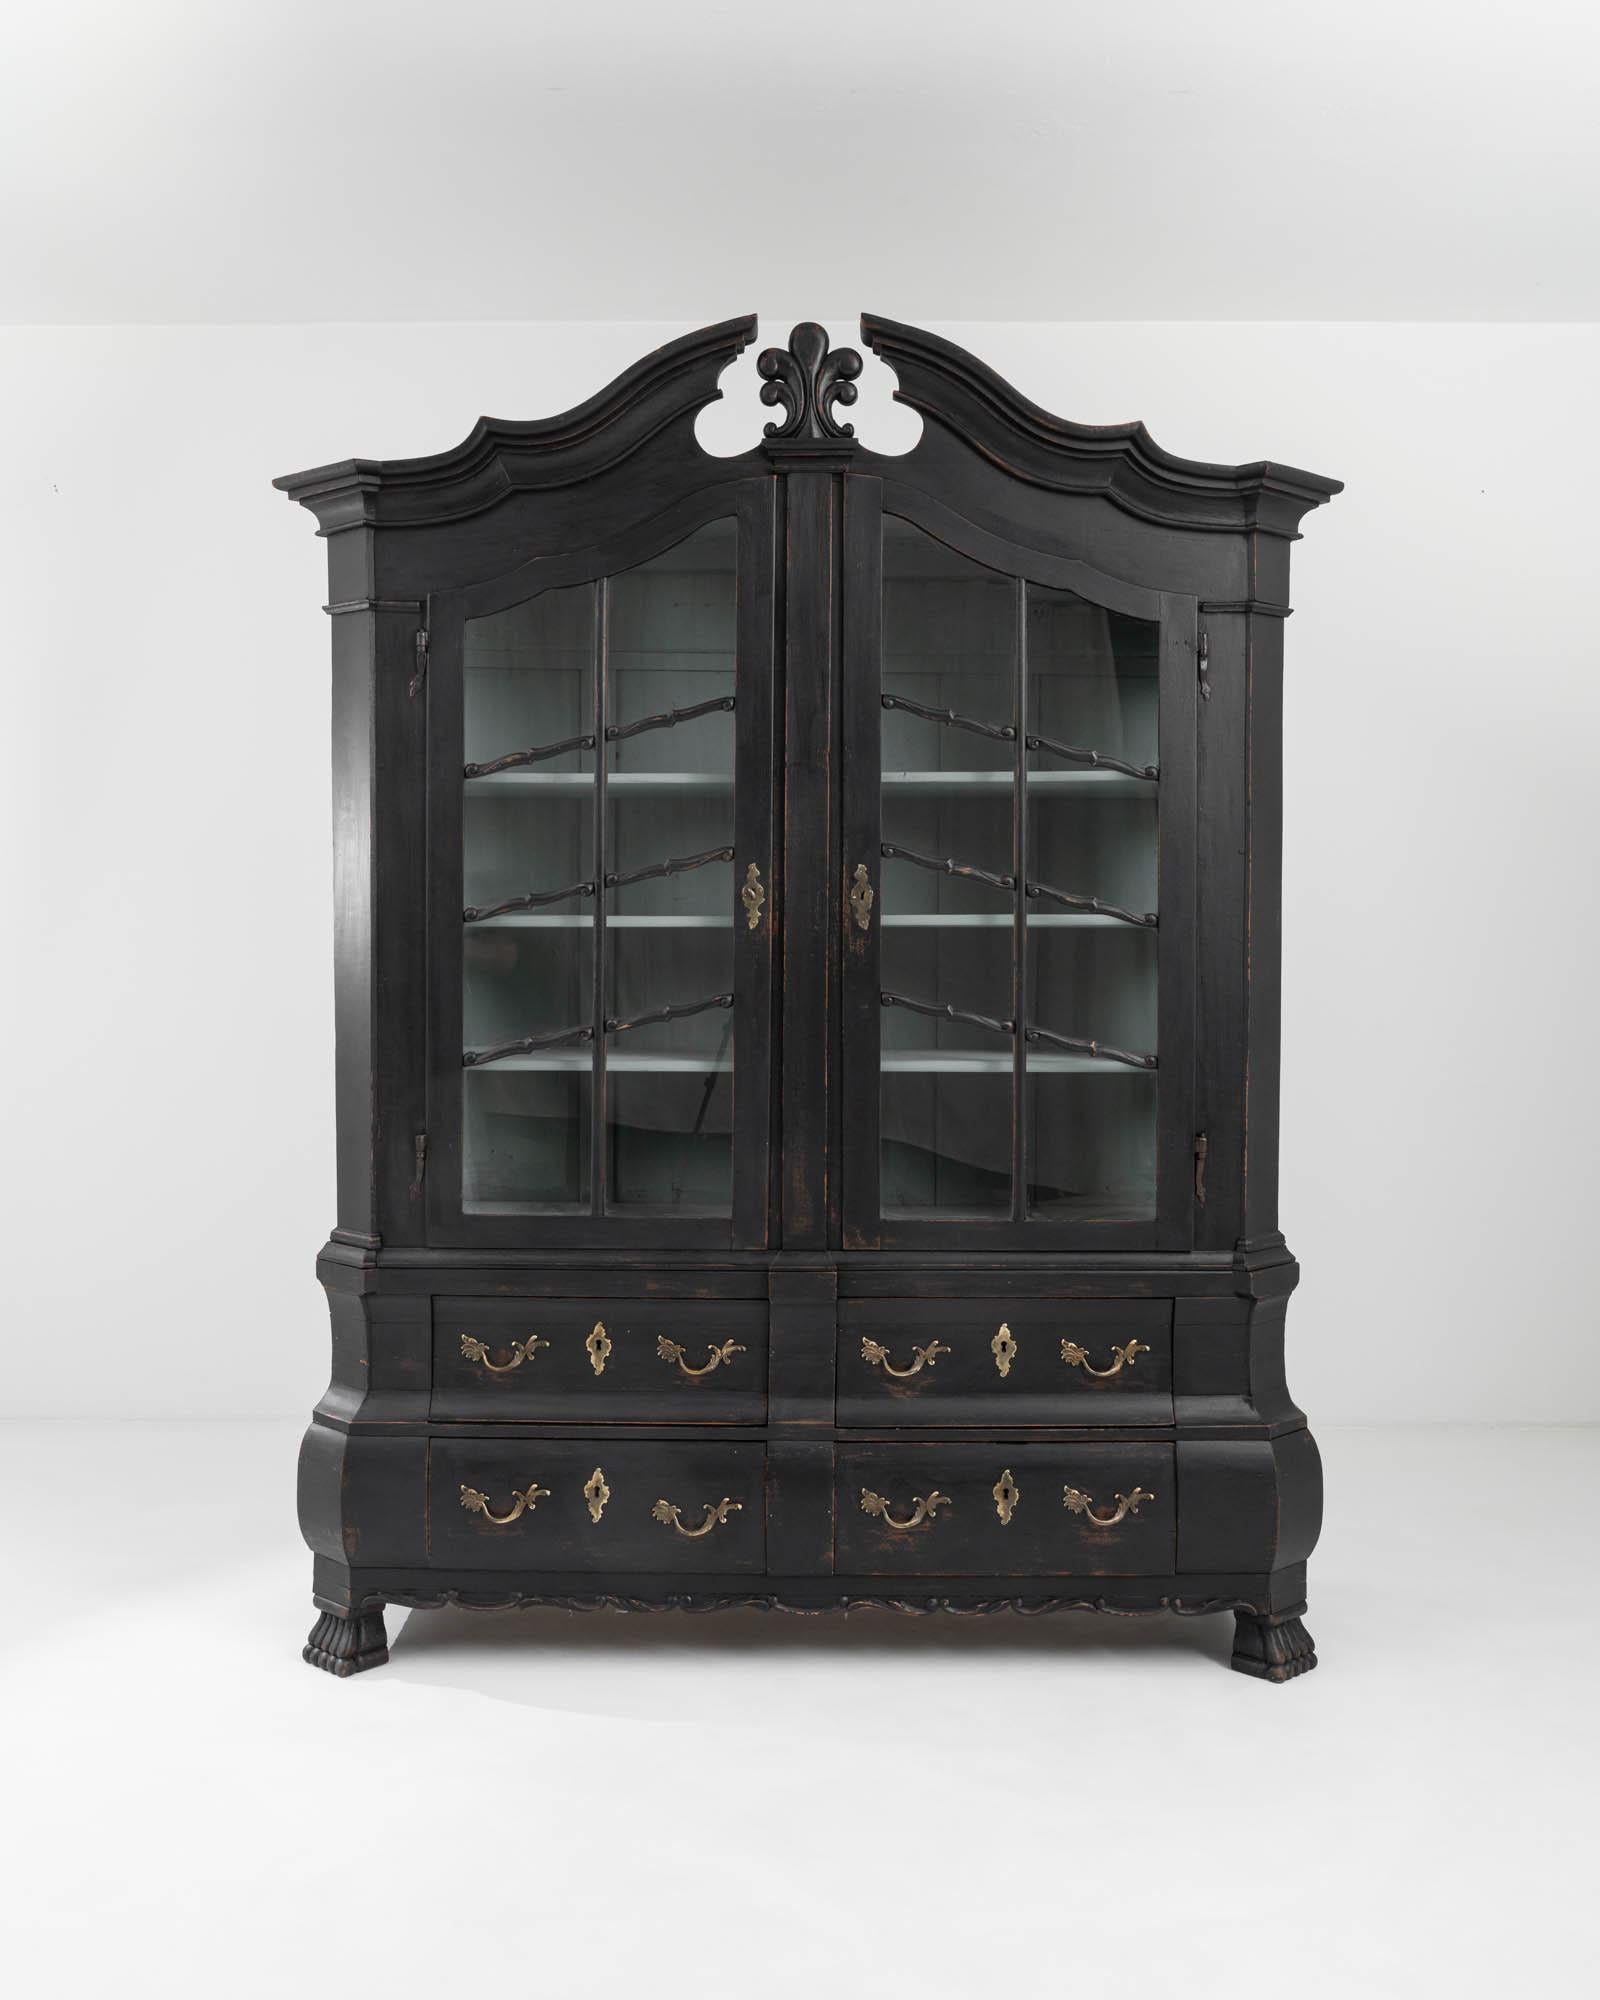 Step back in time and behold the captivating allure of this German vitrine, made circa 1820. This extraordinary piece, massive yet elegantly poised, stands as a behemoth of exquisite craftsmanship, exuding a timeless charm that effortlessly enchants